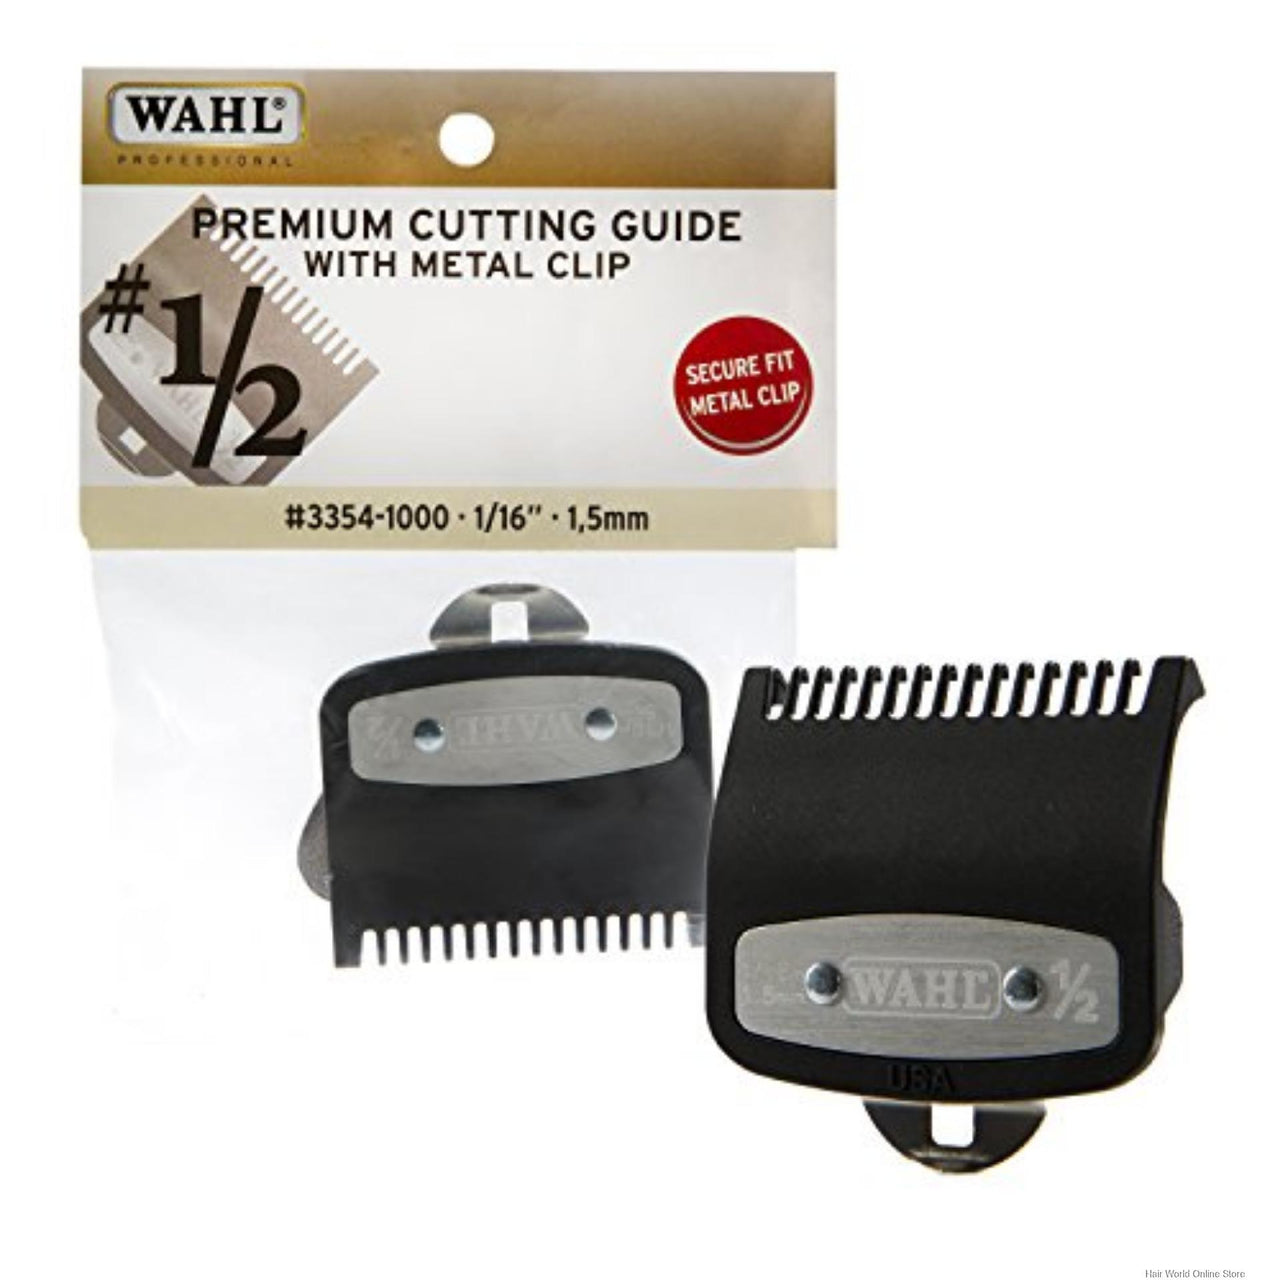 WAHL PROFESSIONAL_Premium Cutting Guide #1/2 (1/16", 1.5mm) w/ Metal Clip_Cosmetic World